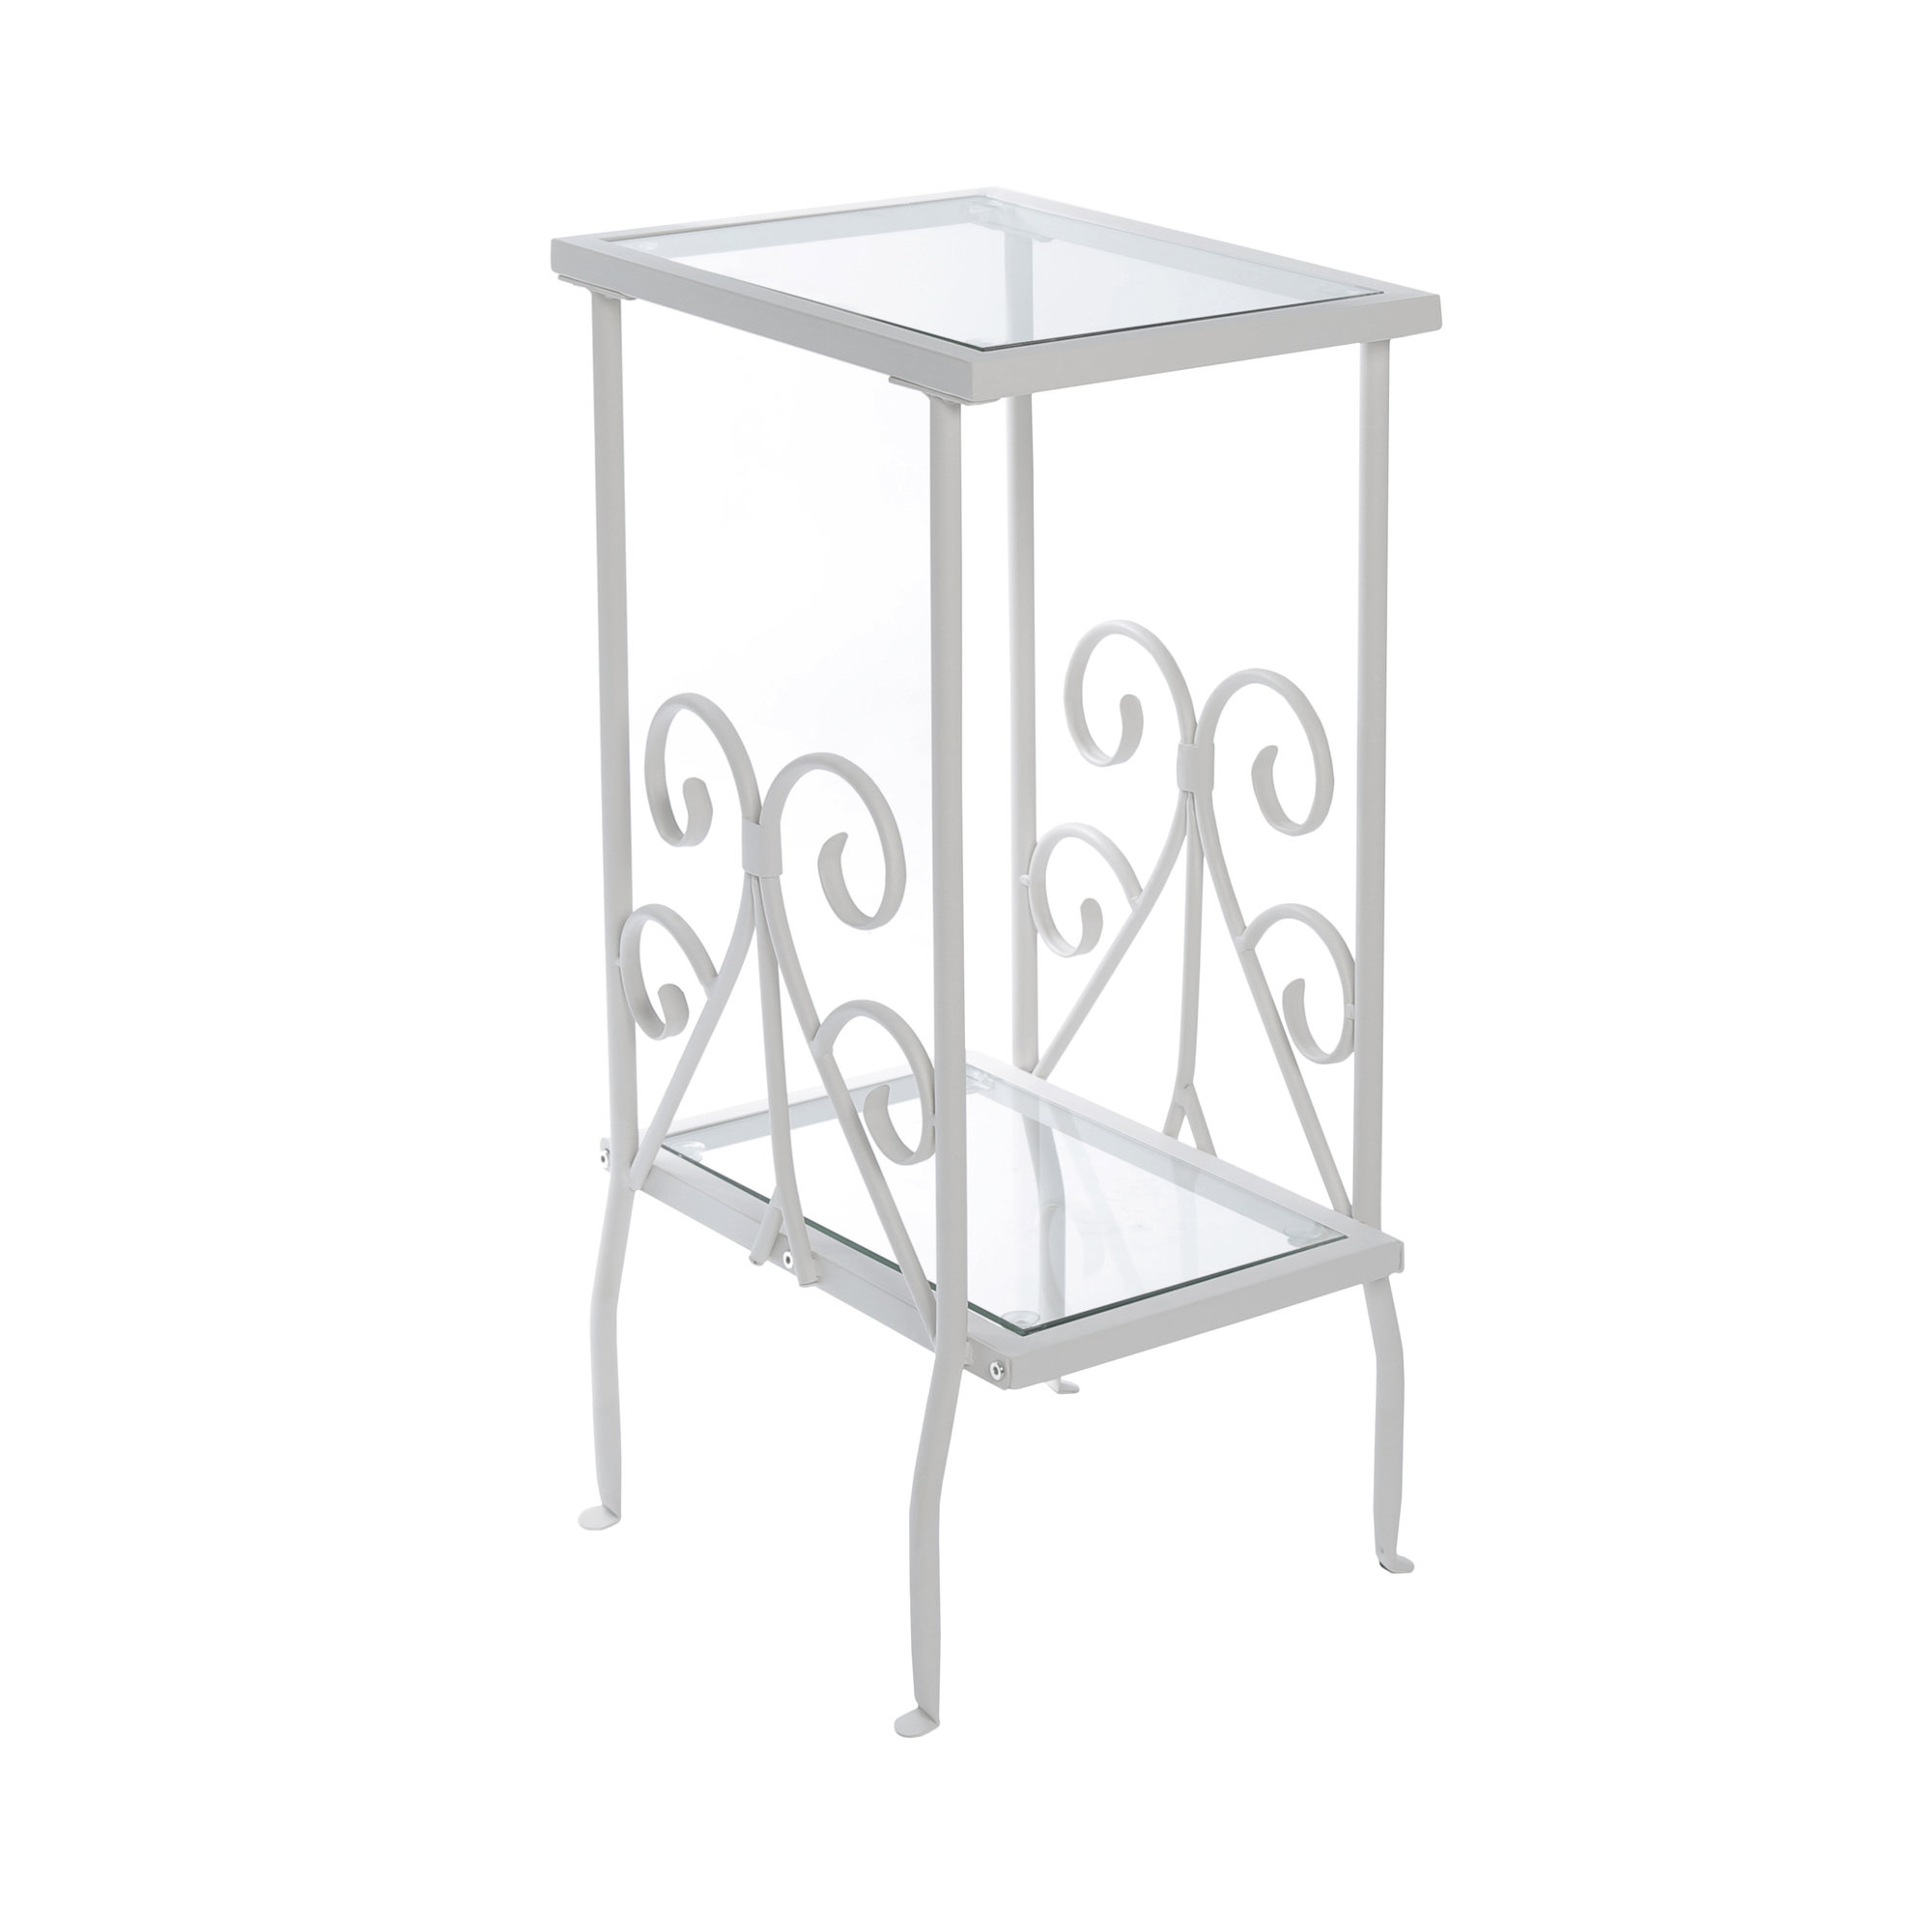 12" x 16" x 30" White Clear Metal Tempered Glass Accent Table